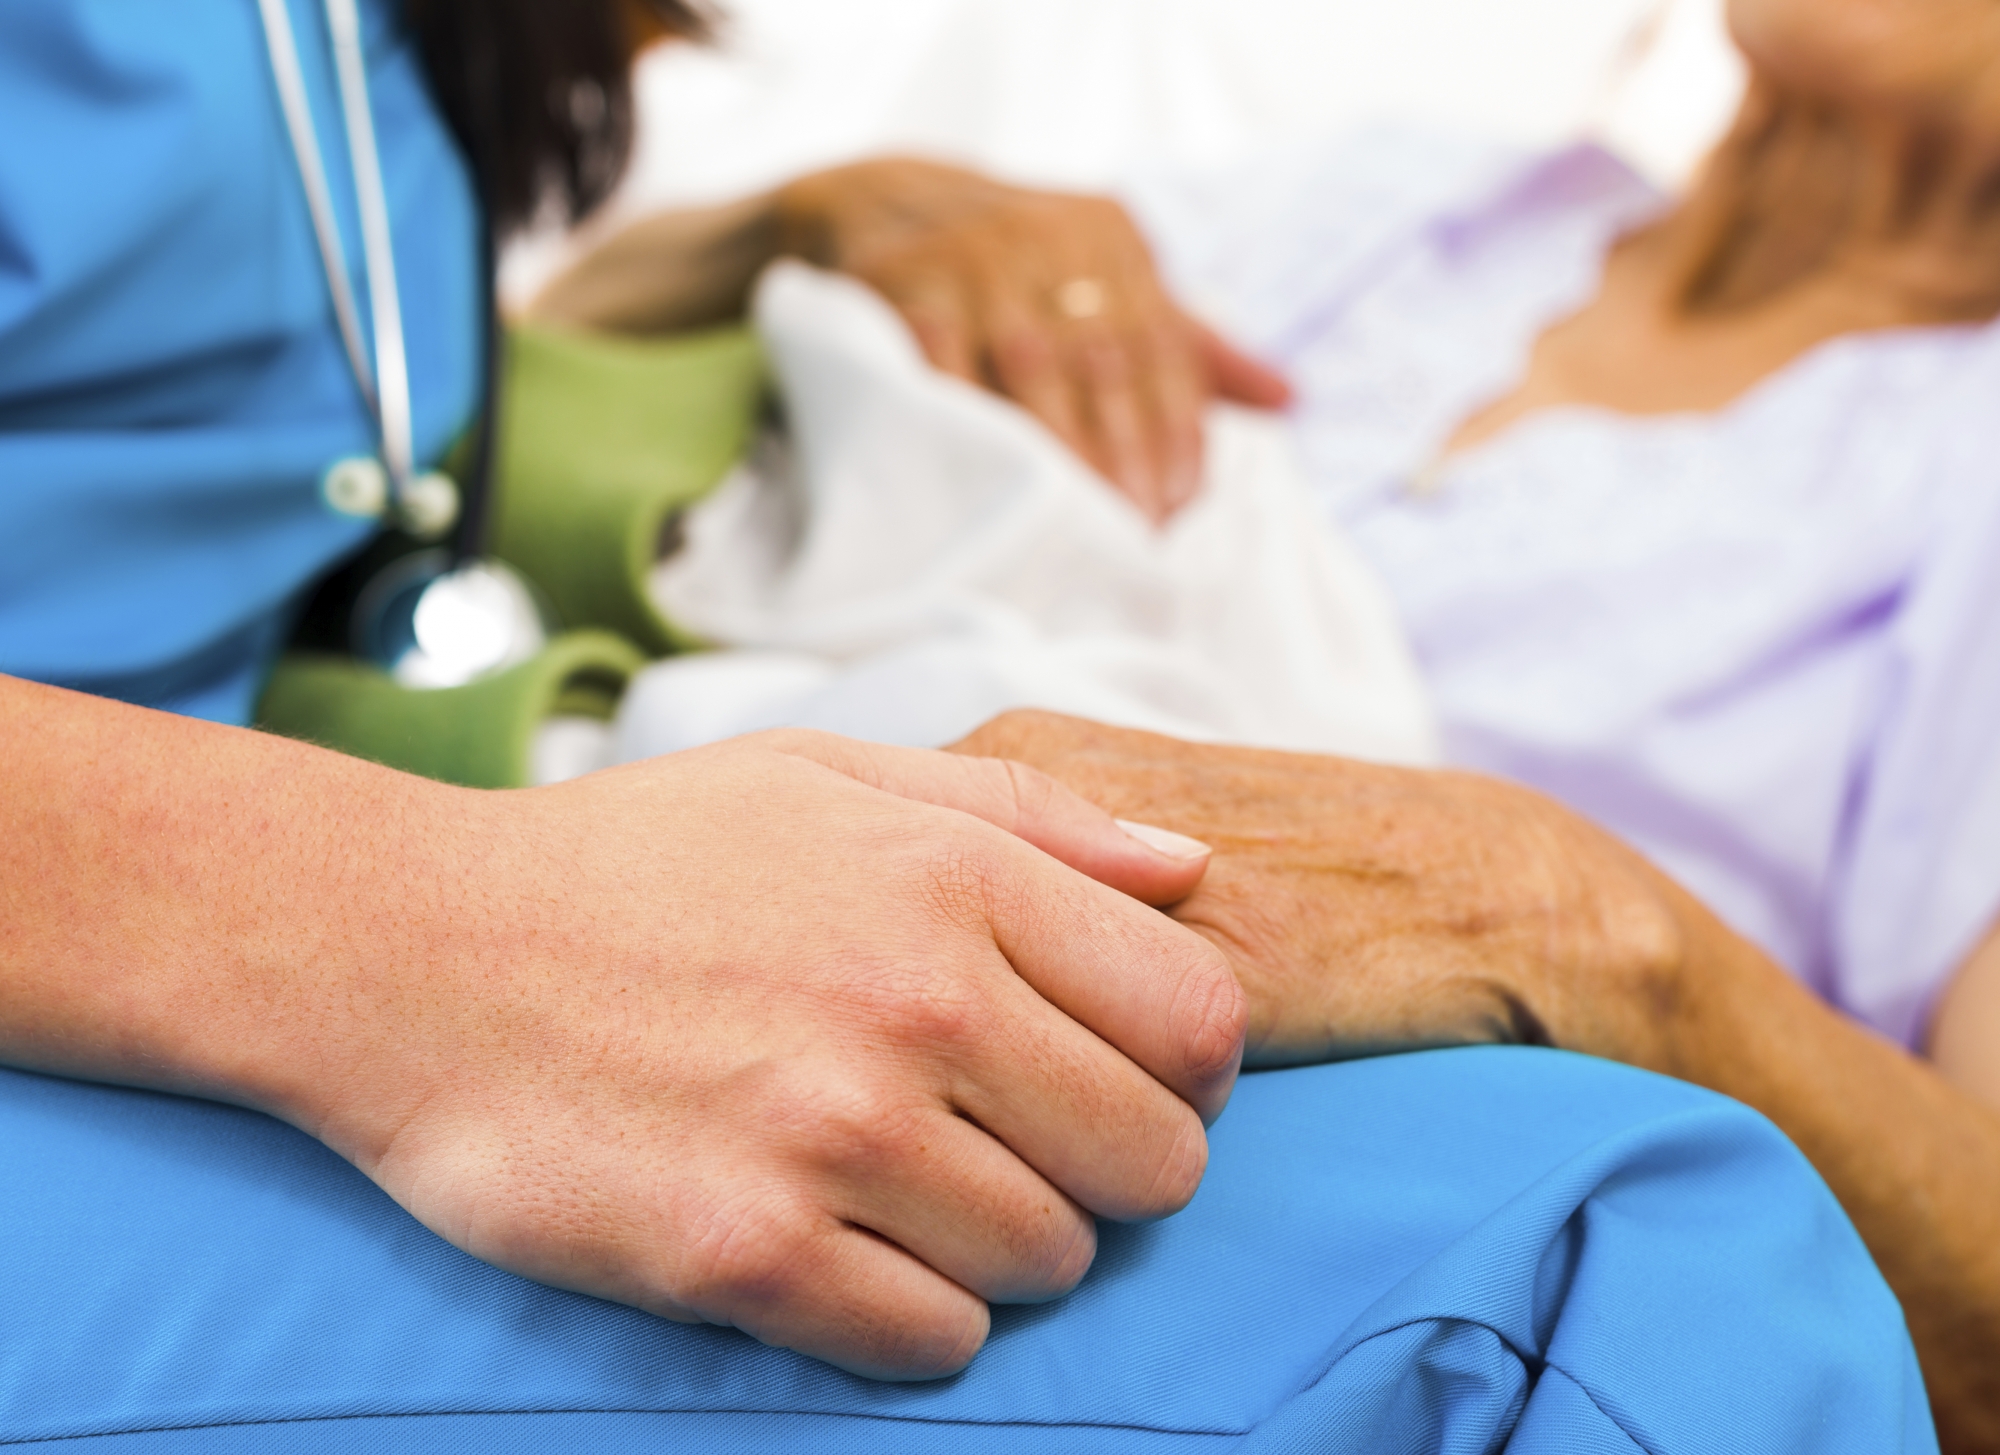 Image or nurse and patient holding hands